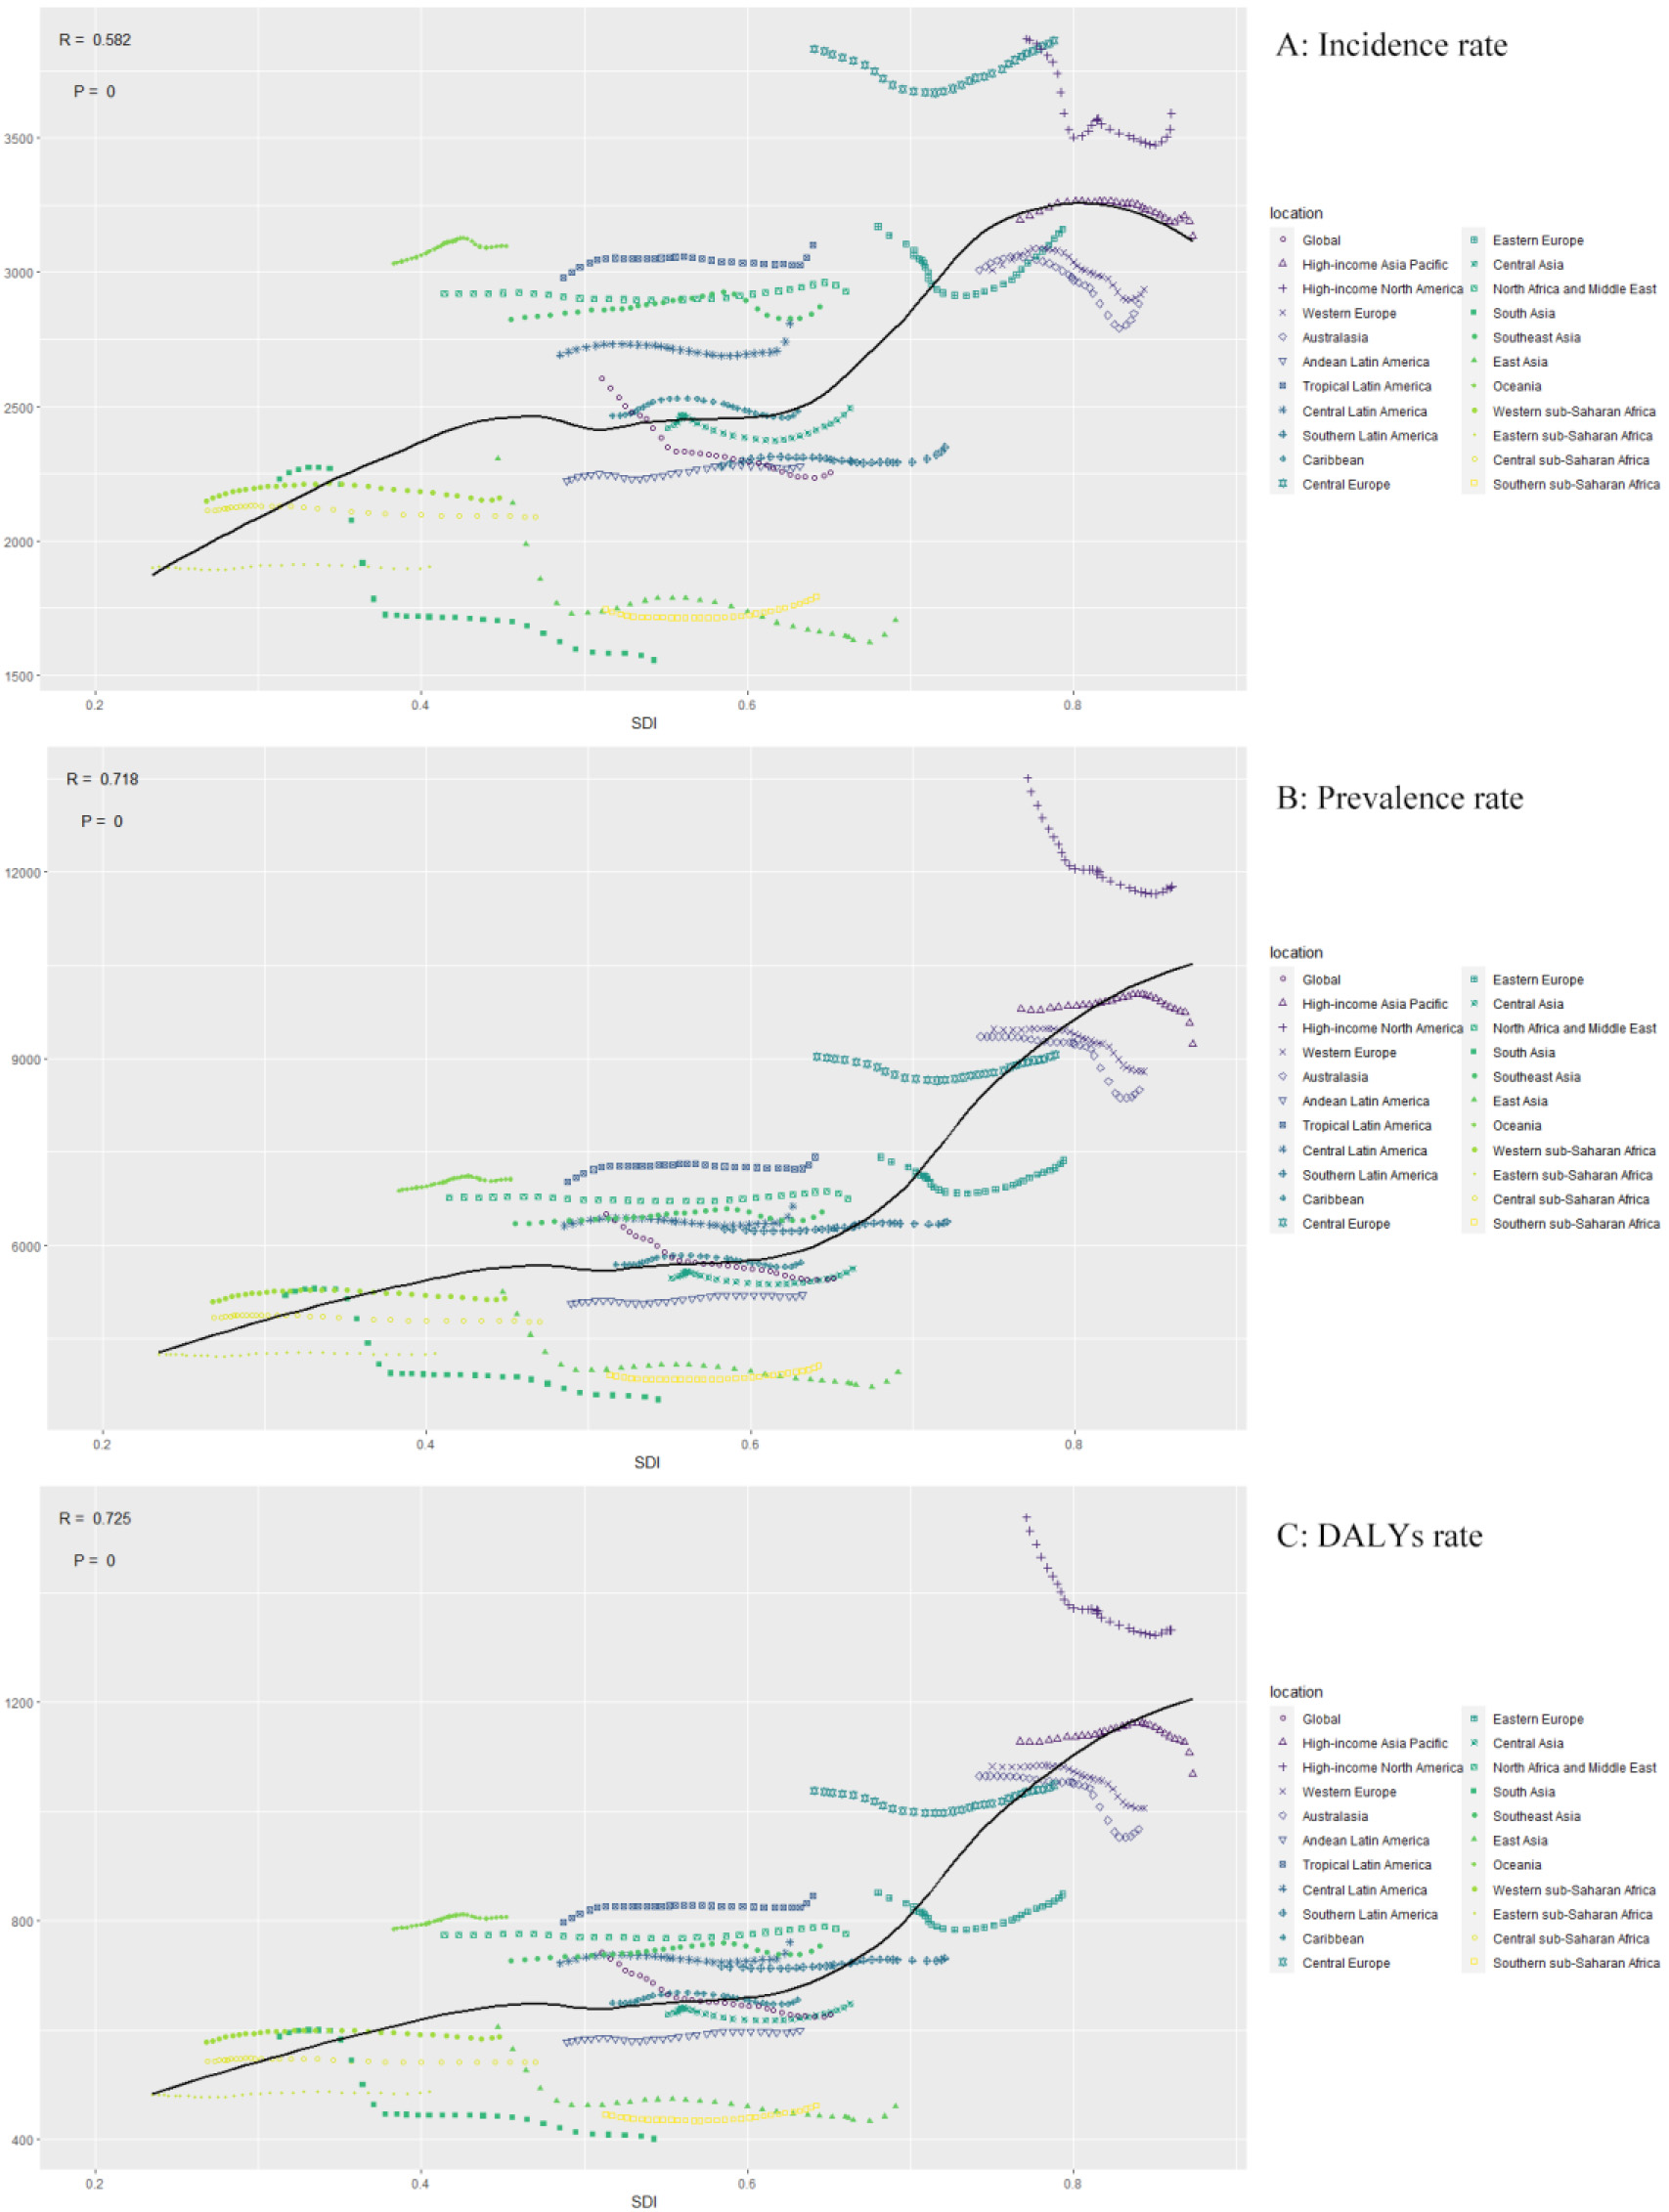 Incidence rates, prevalence rates and DALYs rates of low back pain for 21 GBD regions by SDI between 1990 and 2019.